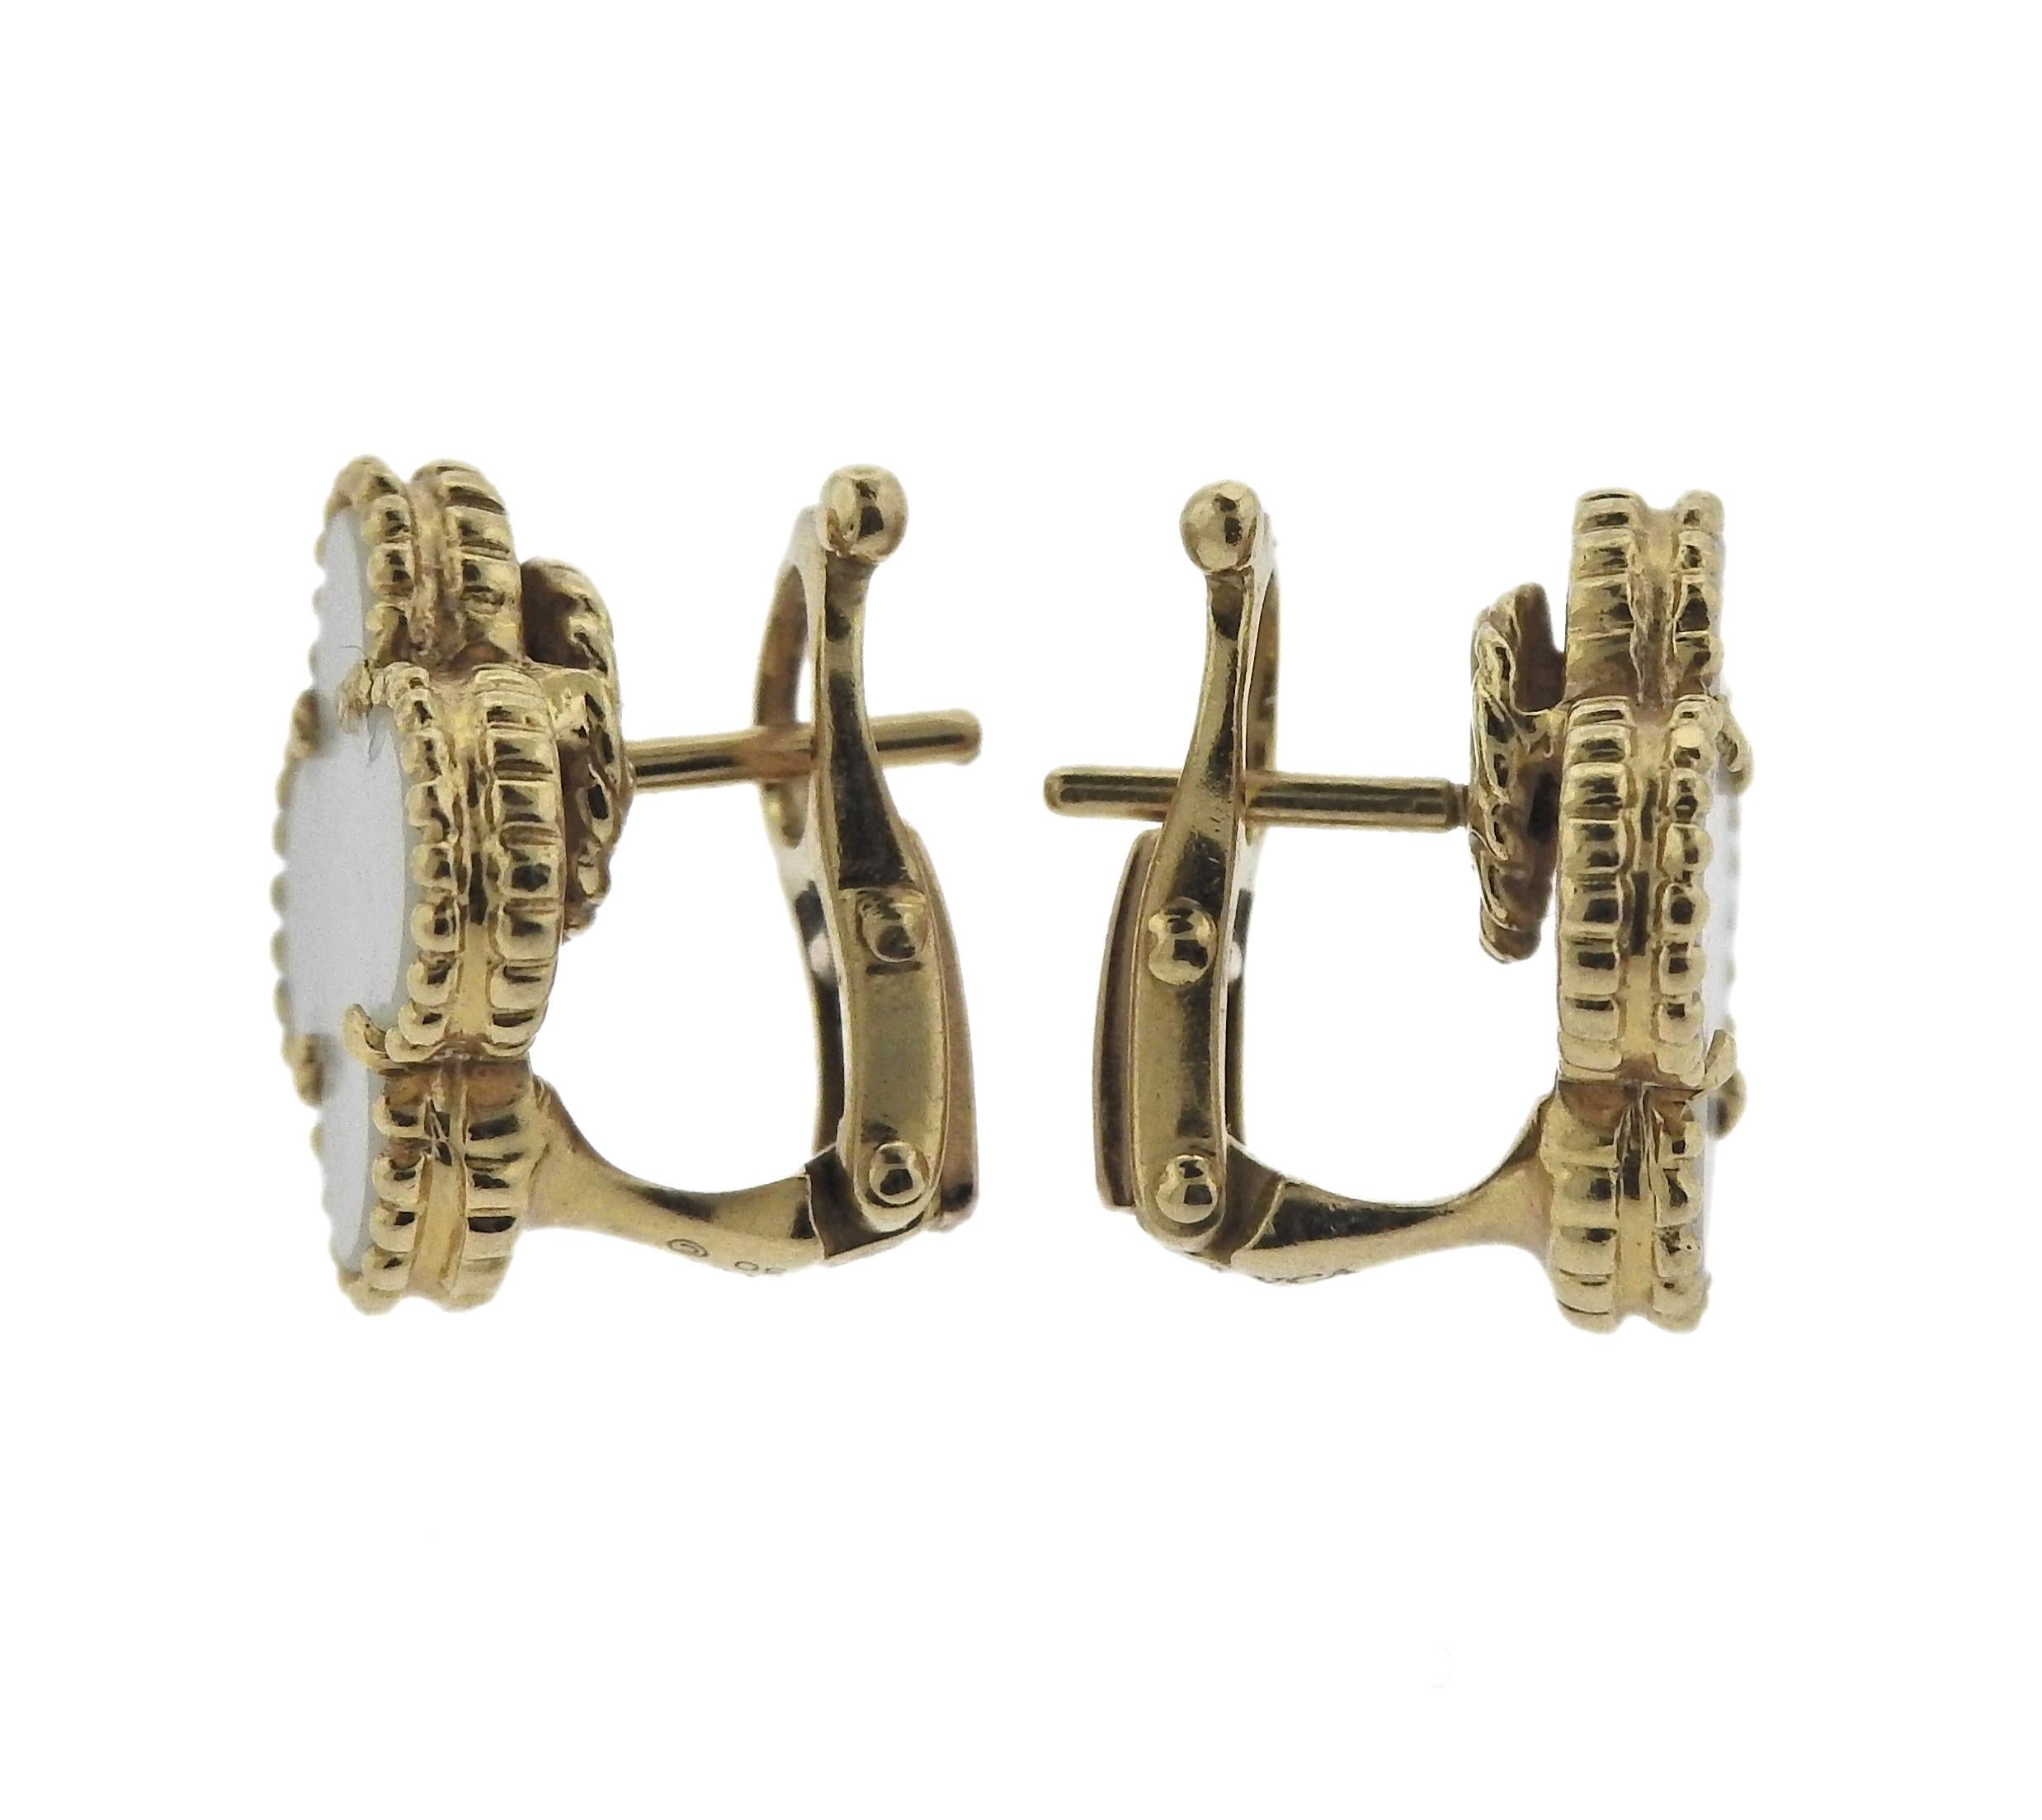 Pair of 18k yellow gold Vintage Alhambra earrings, crafted by Van Cleef & Arpels, set with mother of pearl. Come with box. Retail $3750. Earrings are 15mm x 15mm, weigh 6.3 grams. Marked CL 94***, VCA, 750.